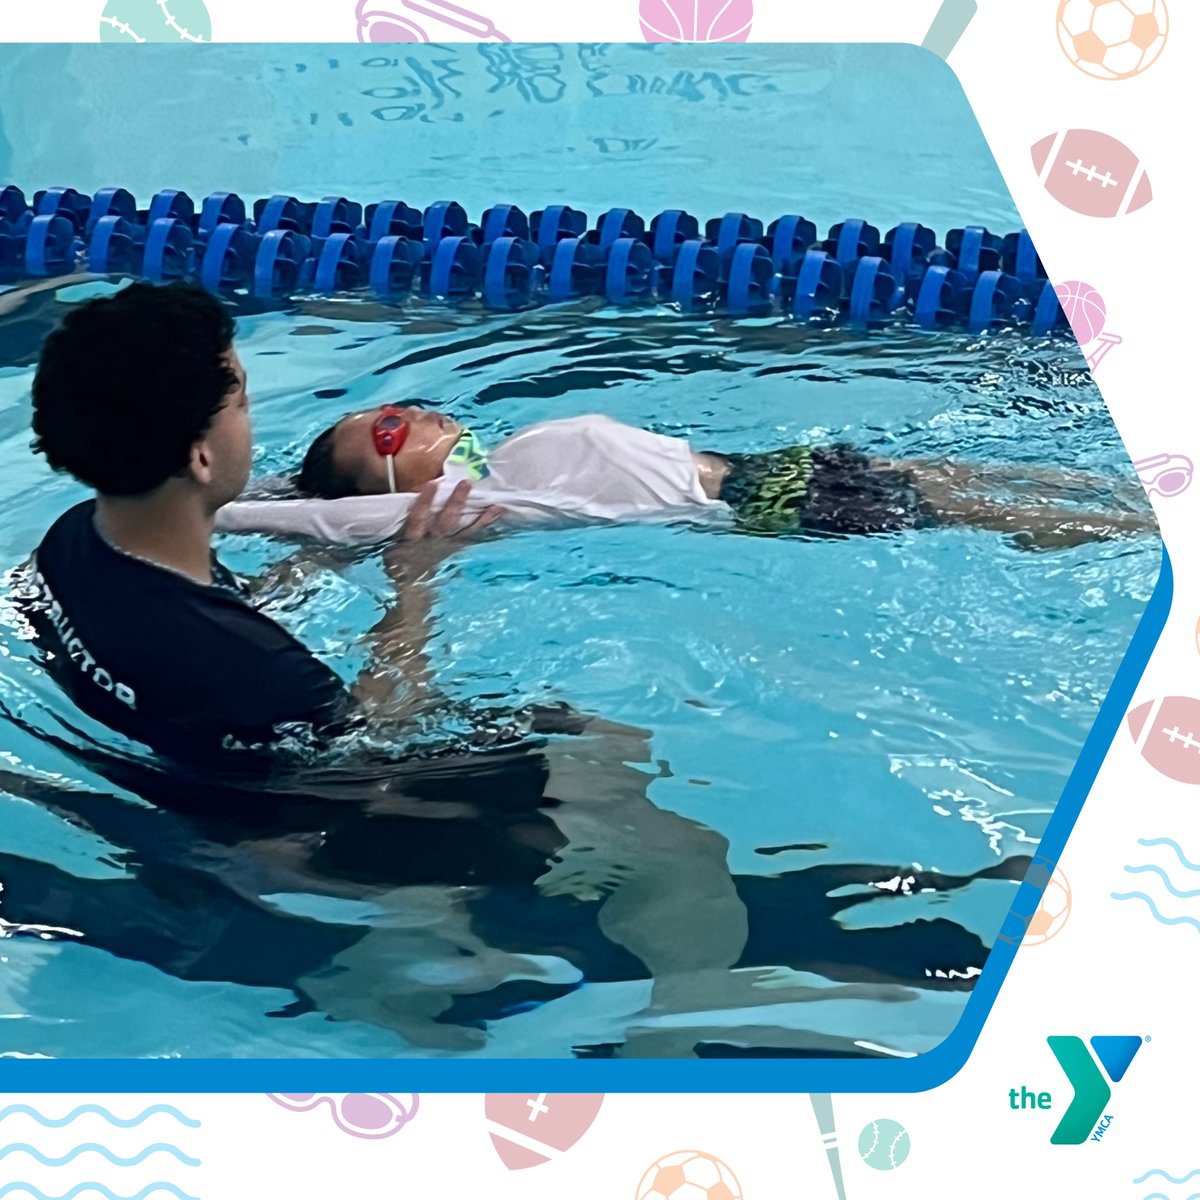 #YMCA Families! Get ahead of your summer & fall plans! 🌞🏊‍♂️🏀 Registration is now open for Summer A, B, C, and Early & Late Fall youth sports and swim programming. Secure your child's spot today! ymcaboston.org/programs Not a Family Member? Upgrade to get early access!